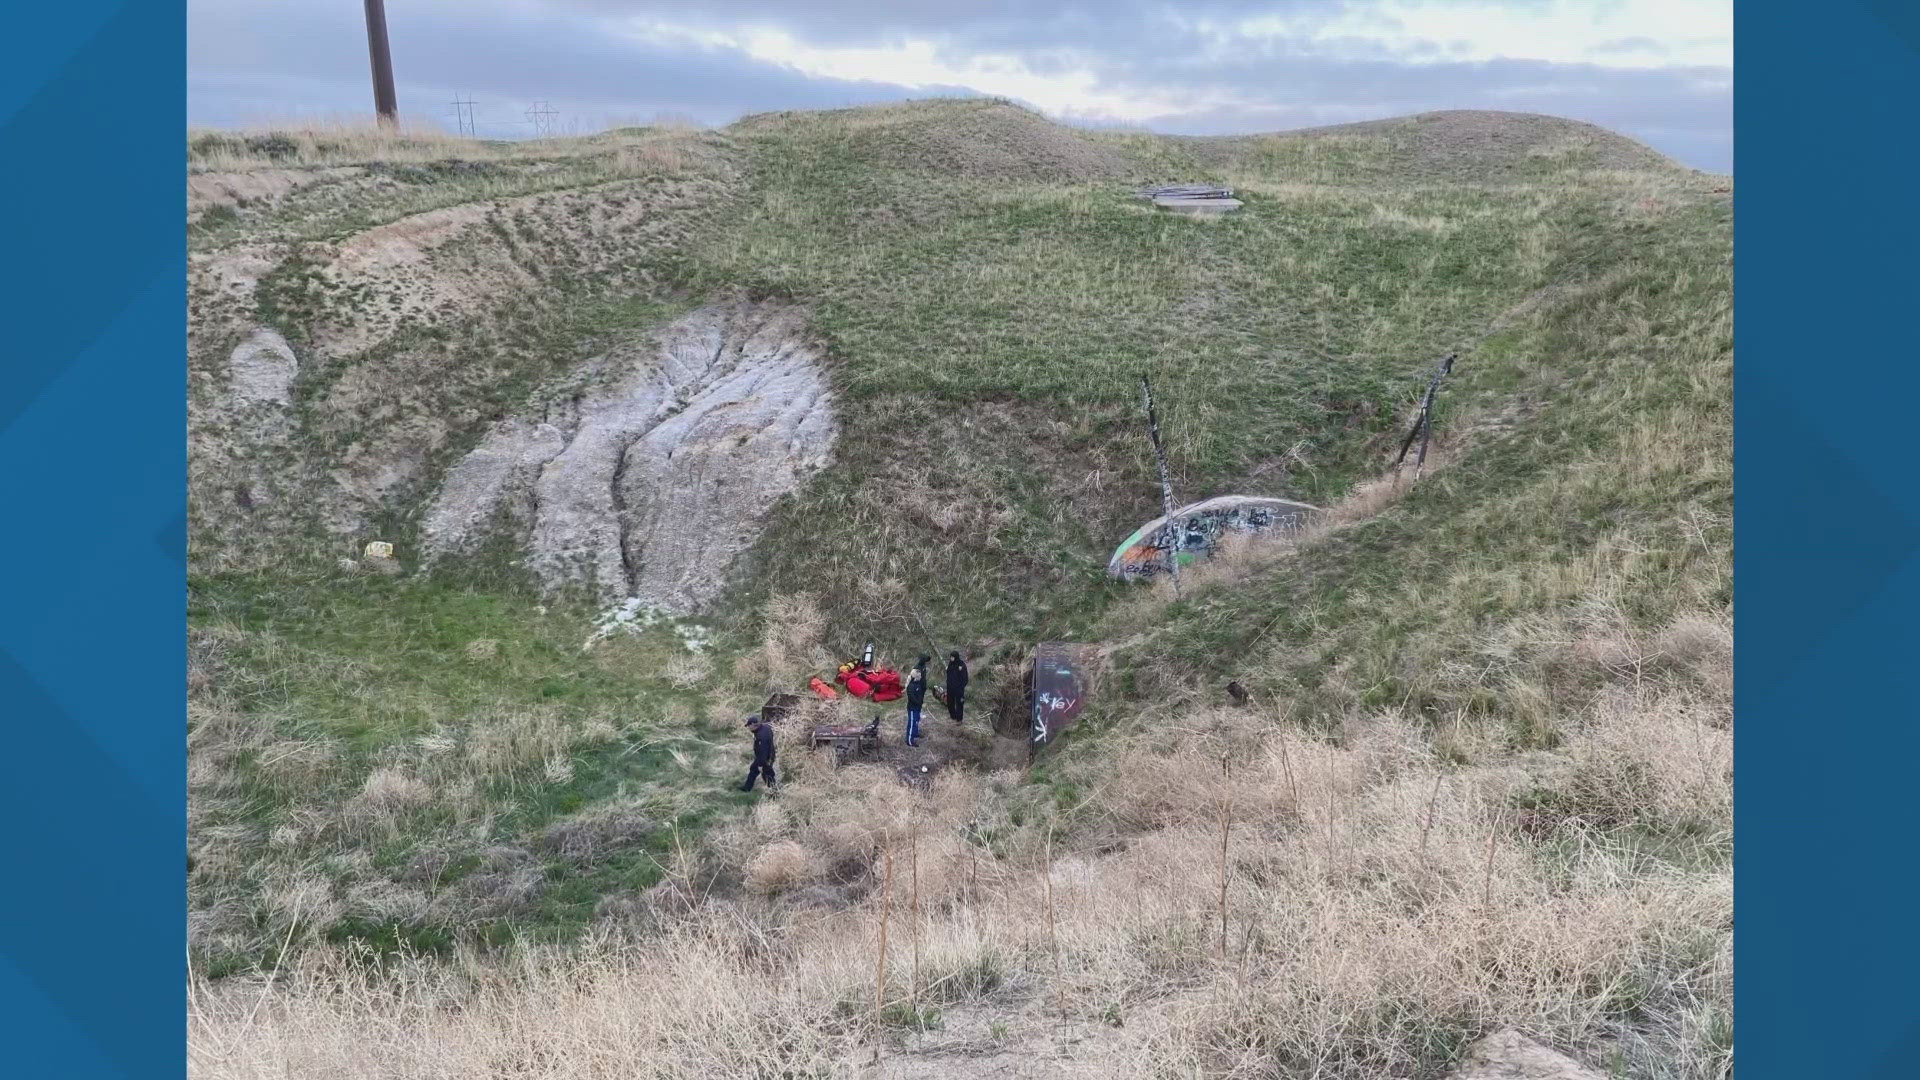 Crews were working to rescue a teen who was seriously injured after falling down an abandoned missile silo Sunday morning.